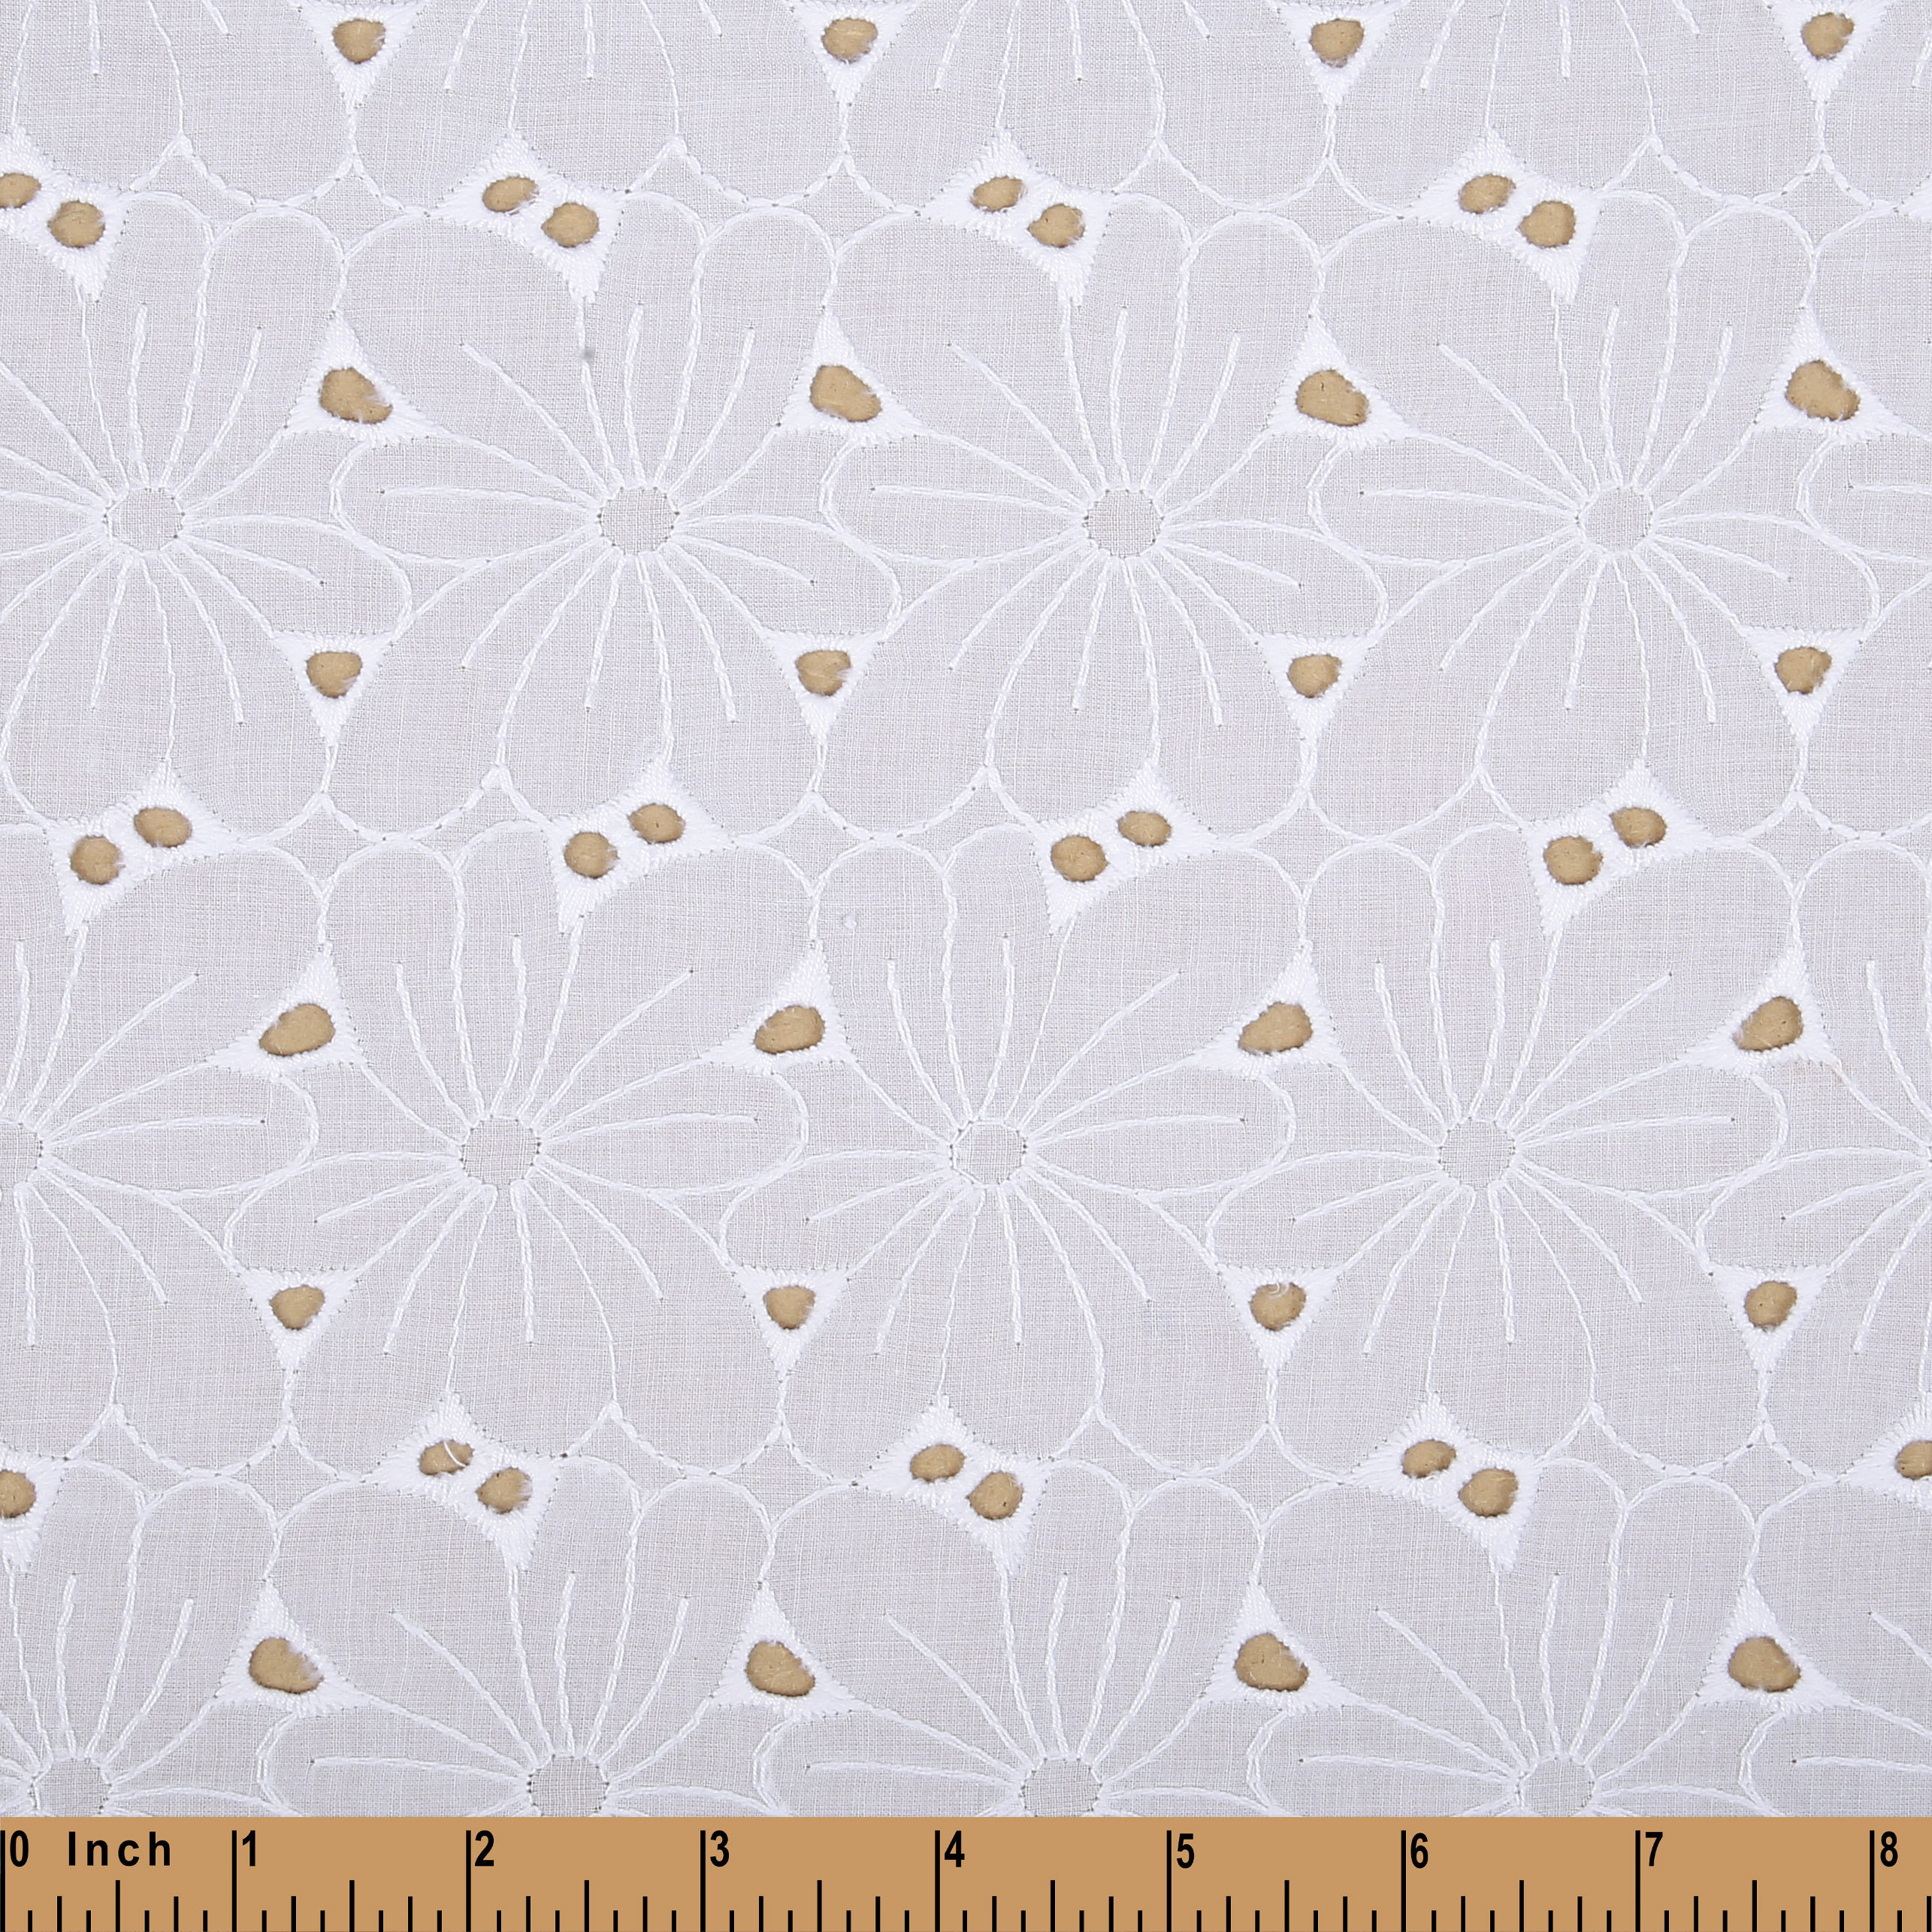 LE04- Large floral White Embroidery fabric